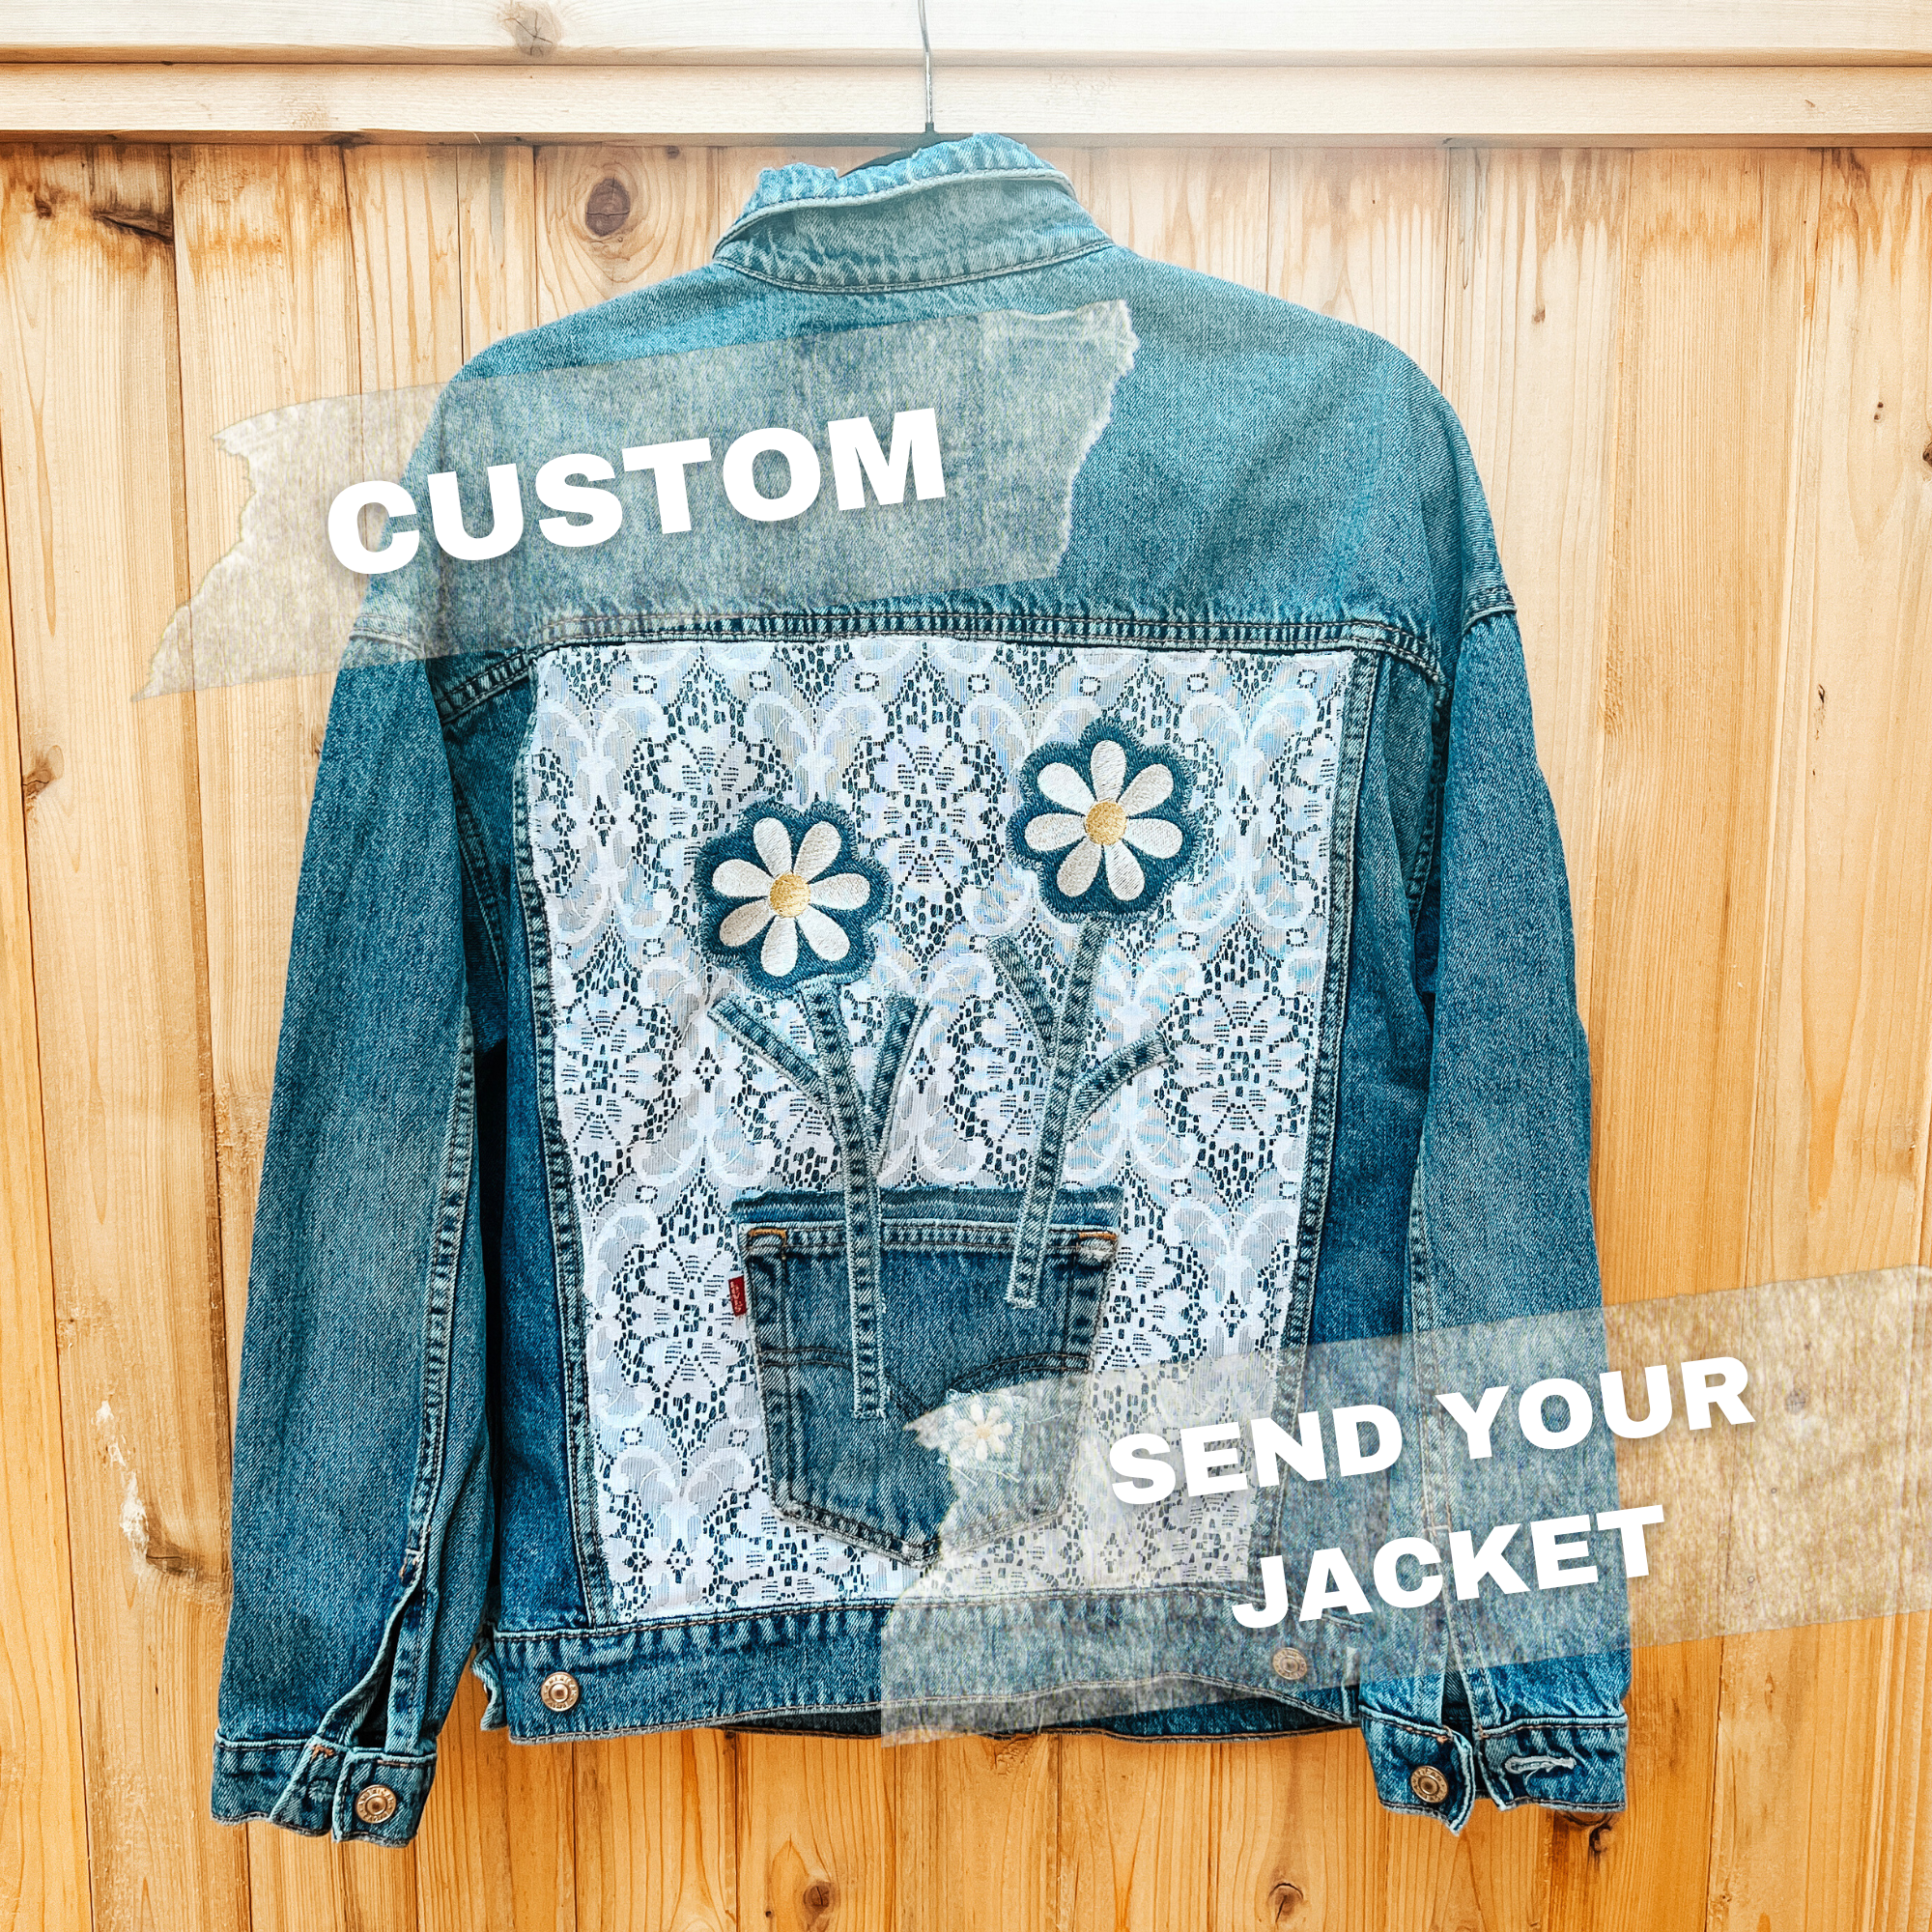 Custom denim jacket upcycled with scrap materials. Has embroidery daisies. Patchwork back and front chest panels. You send your jacket. Price includes return shipping to US + Canada.